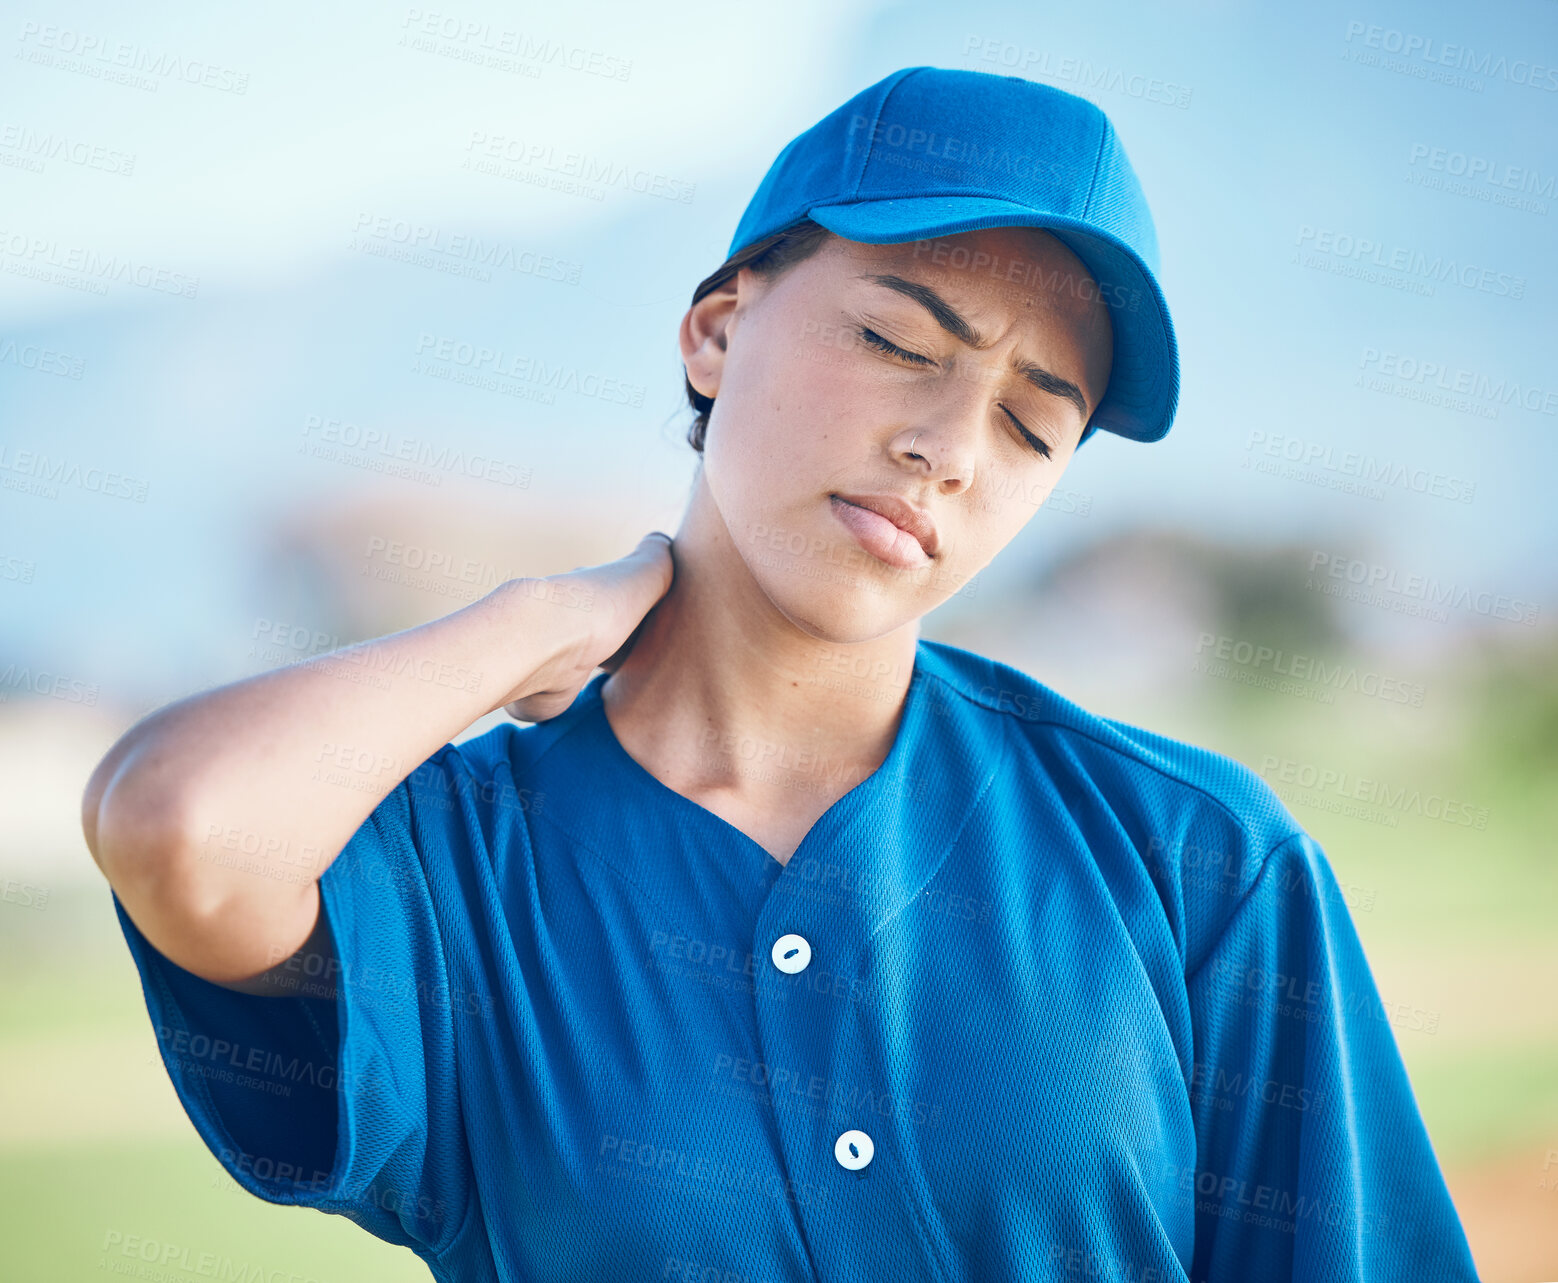 Buy stock photo Neck pain, baseball player and face of sports woman with injury from competition, match game or field workout. Training mistake, athlete burnout or person with hurt problem, medical emergency or risk